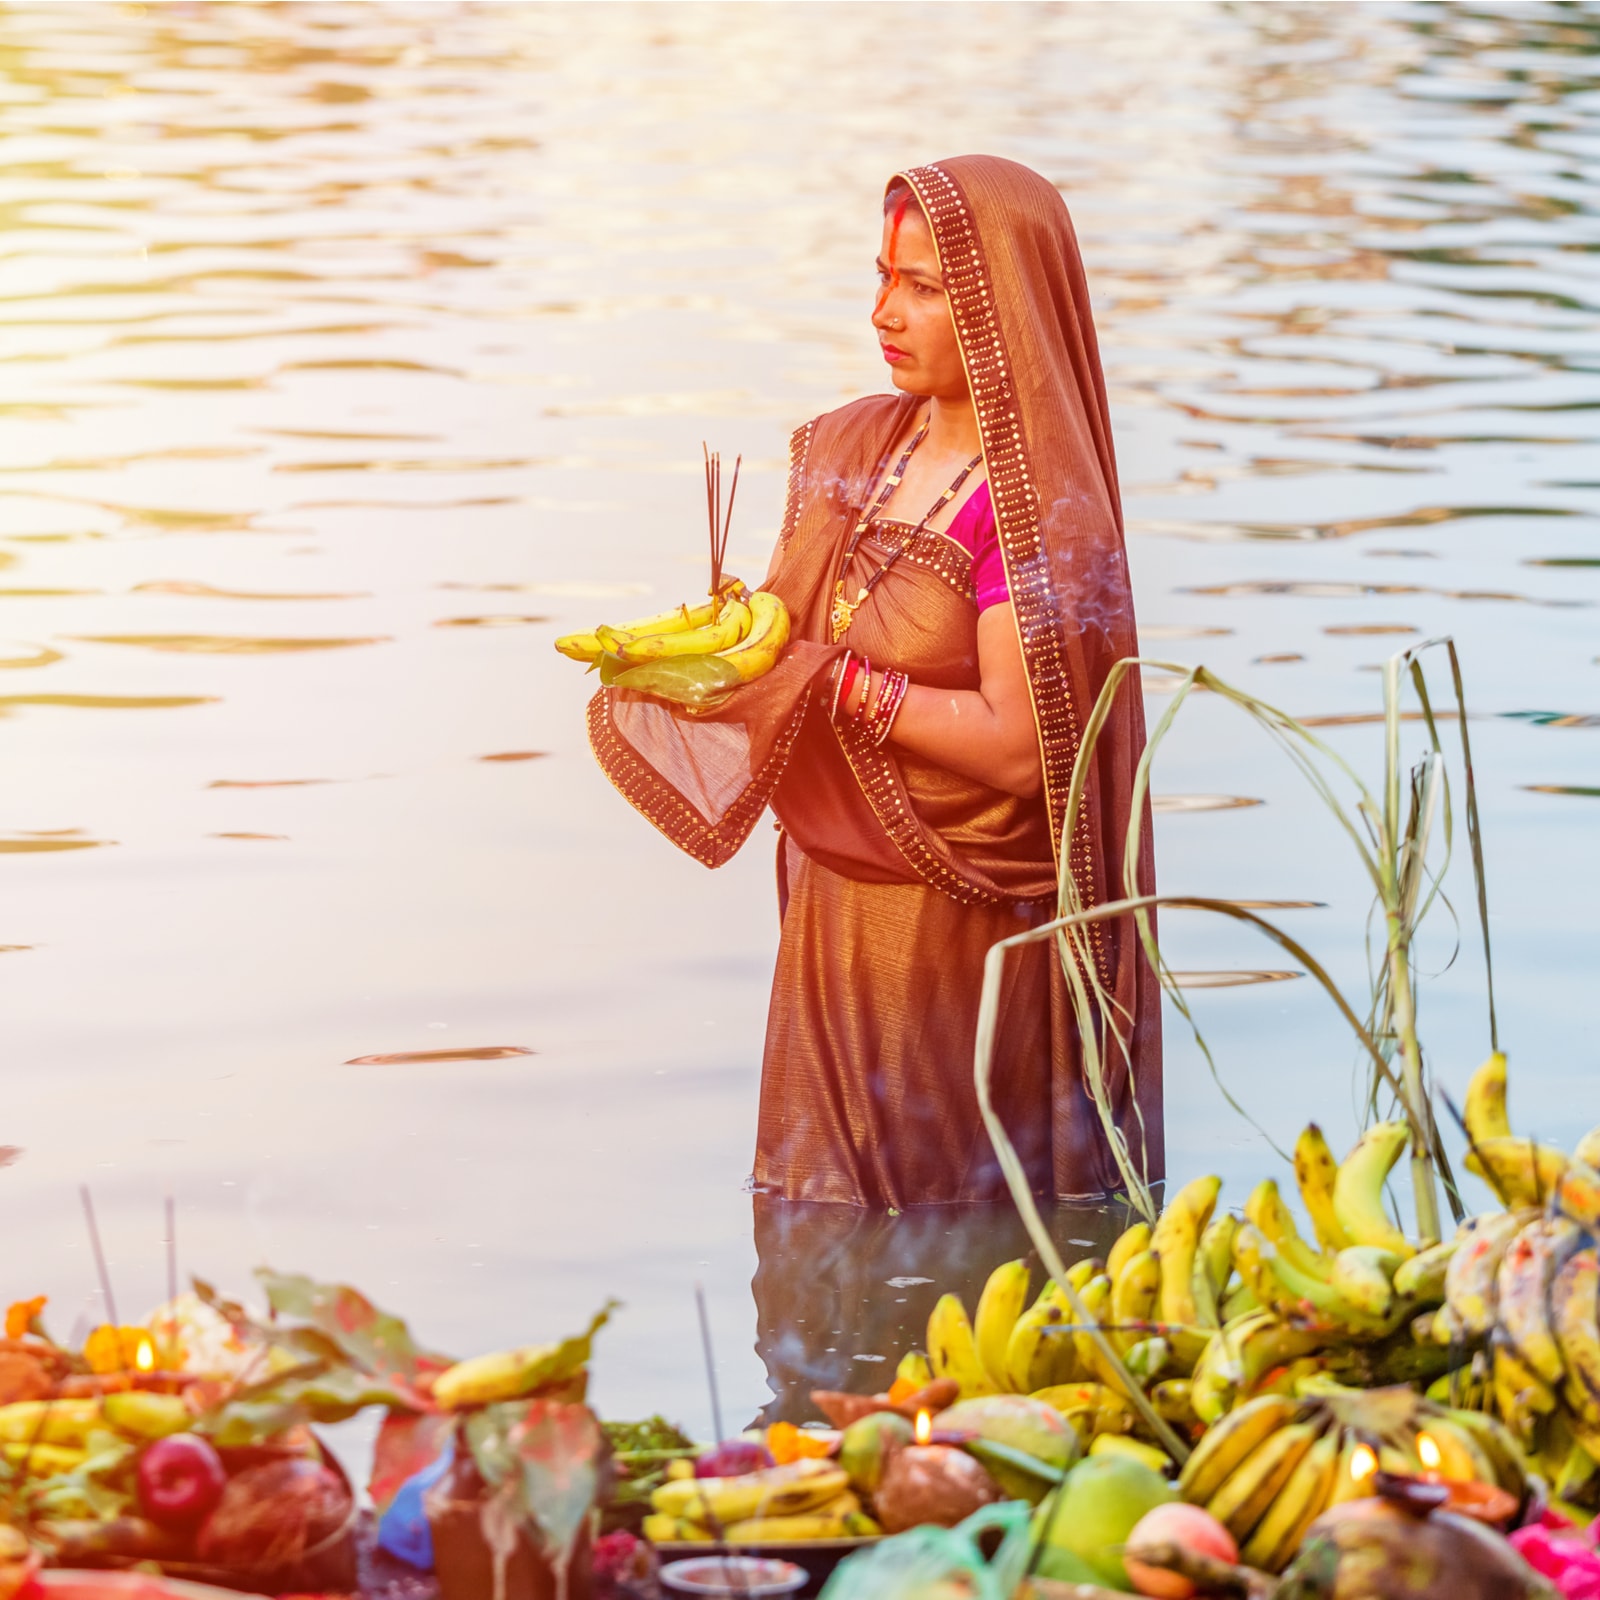 Chhath Puja 2021 Date, Shubh Muhurat, Puja Vidhi and Significance